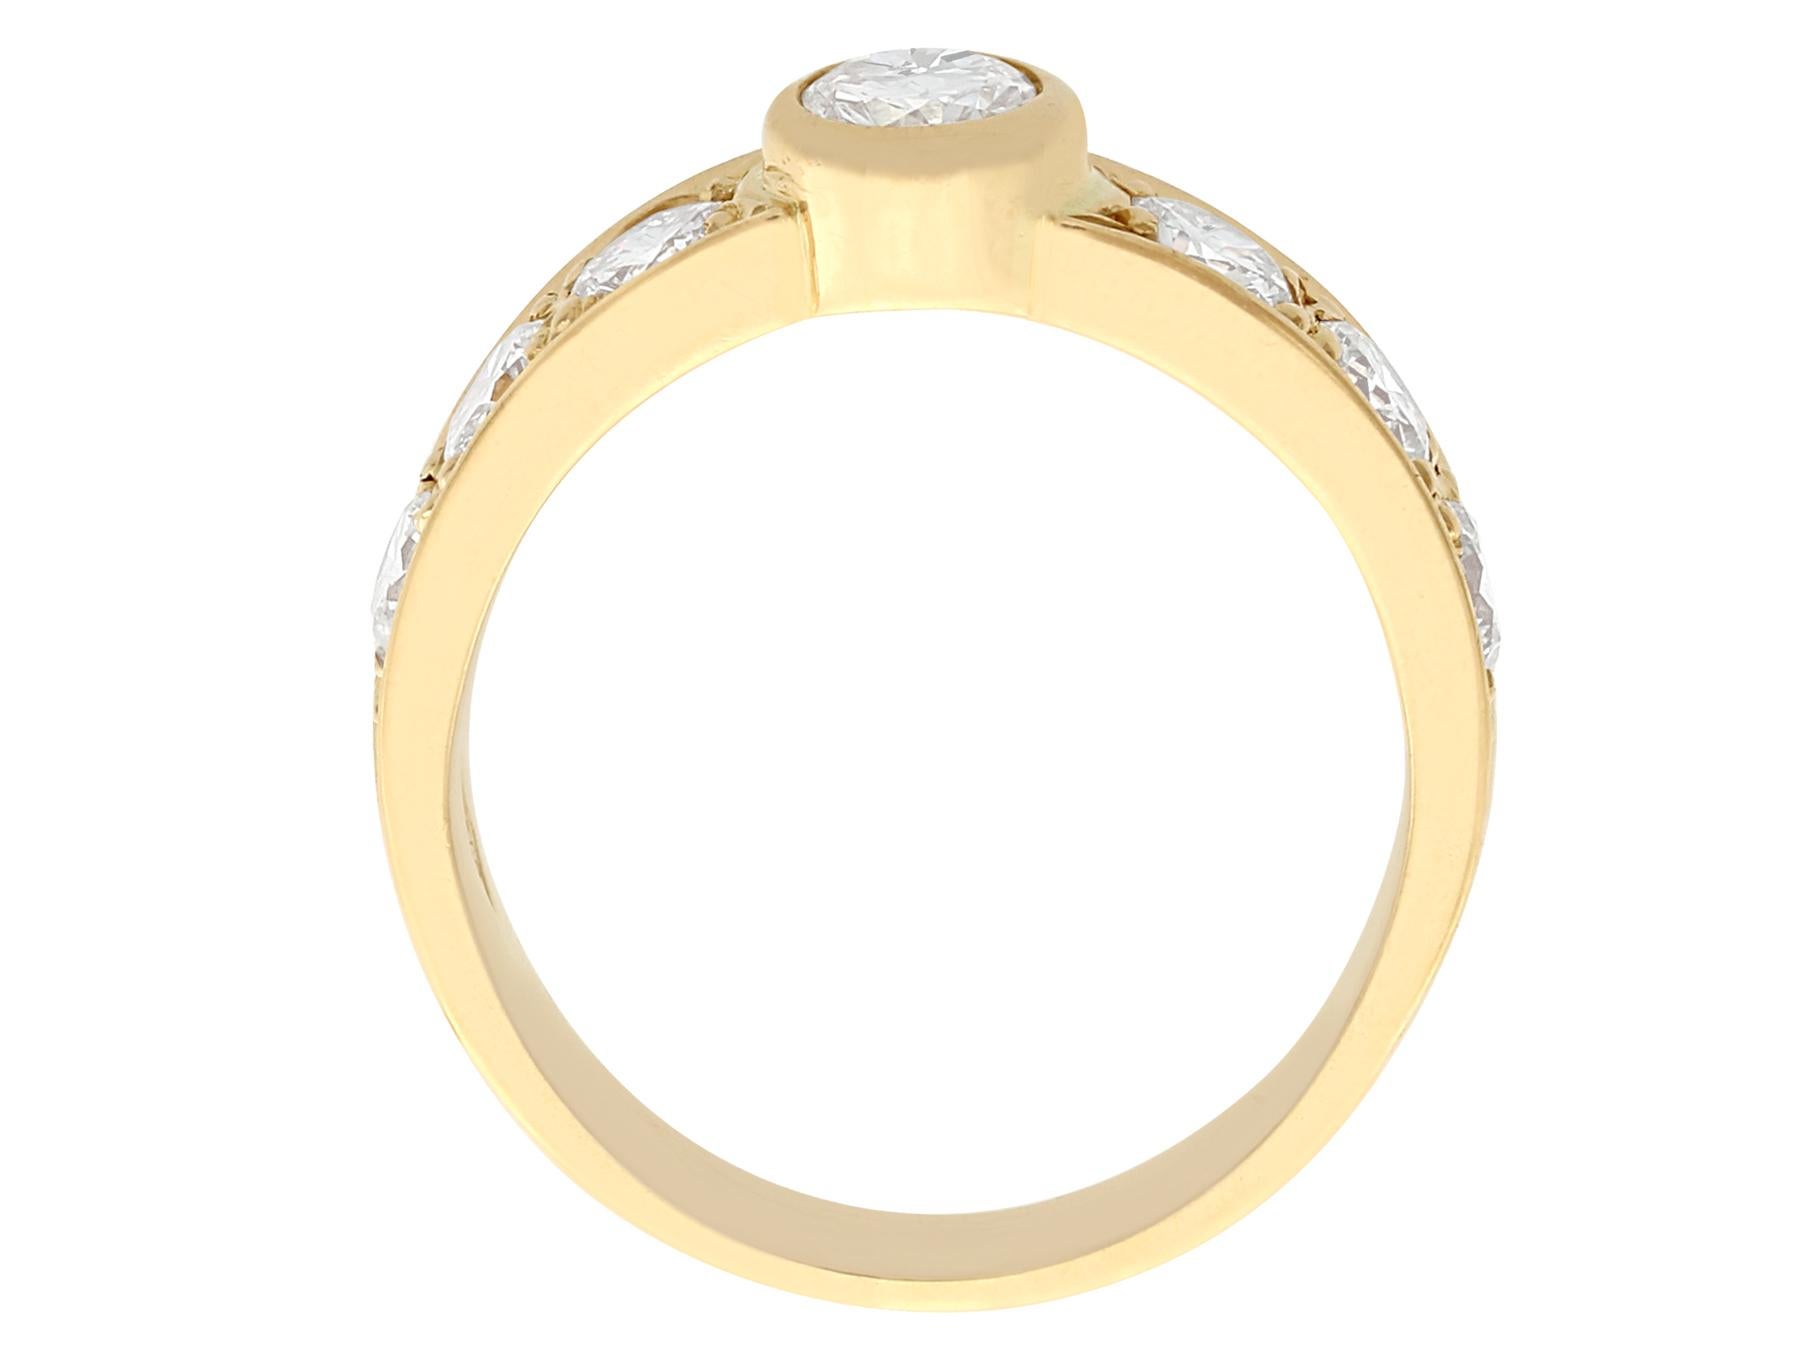 Women's 1980s Vintage 1.08 Carat Diamond and Yellow Gold Cocktail Ring